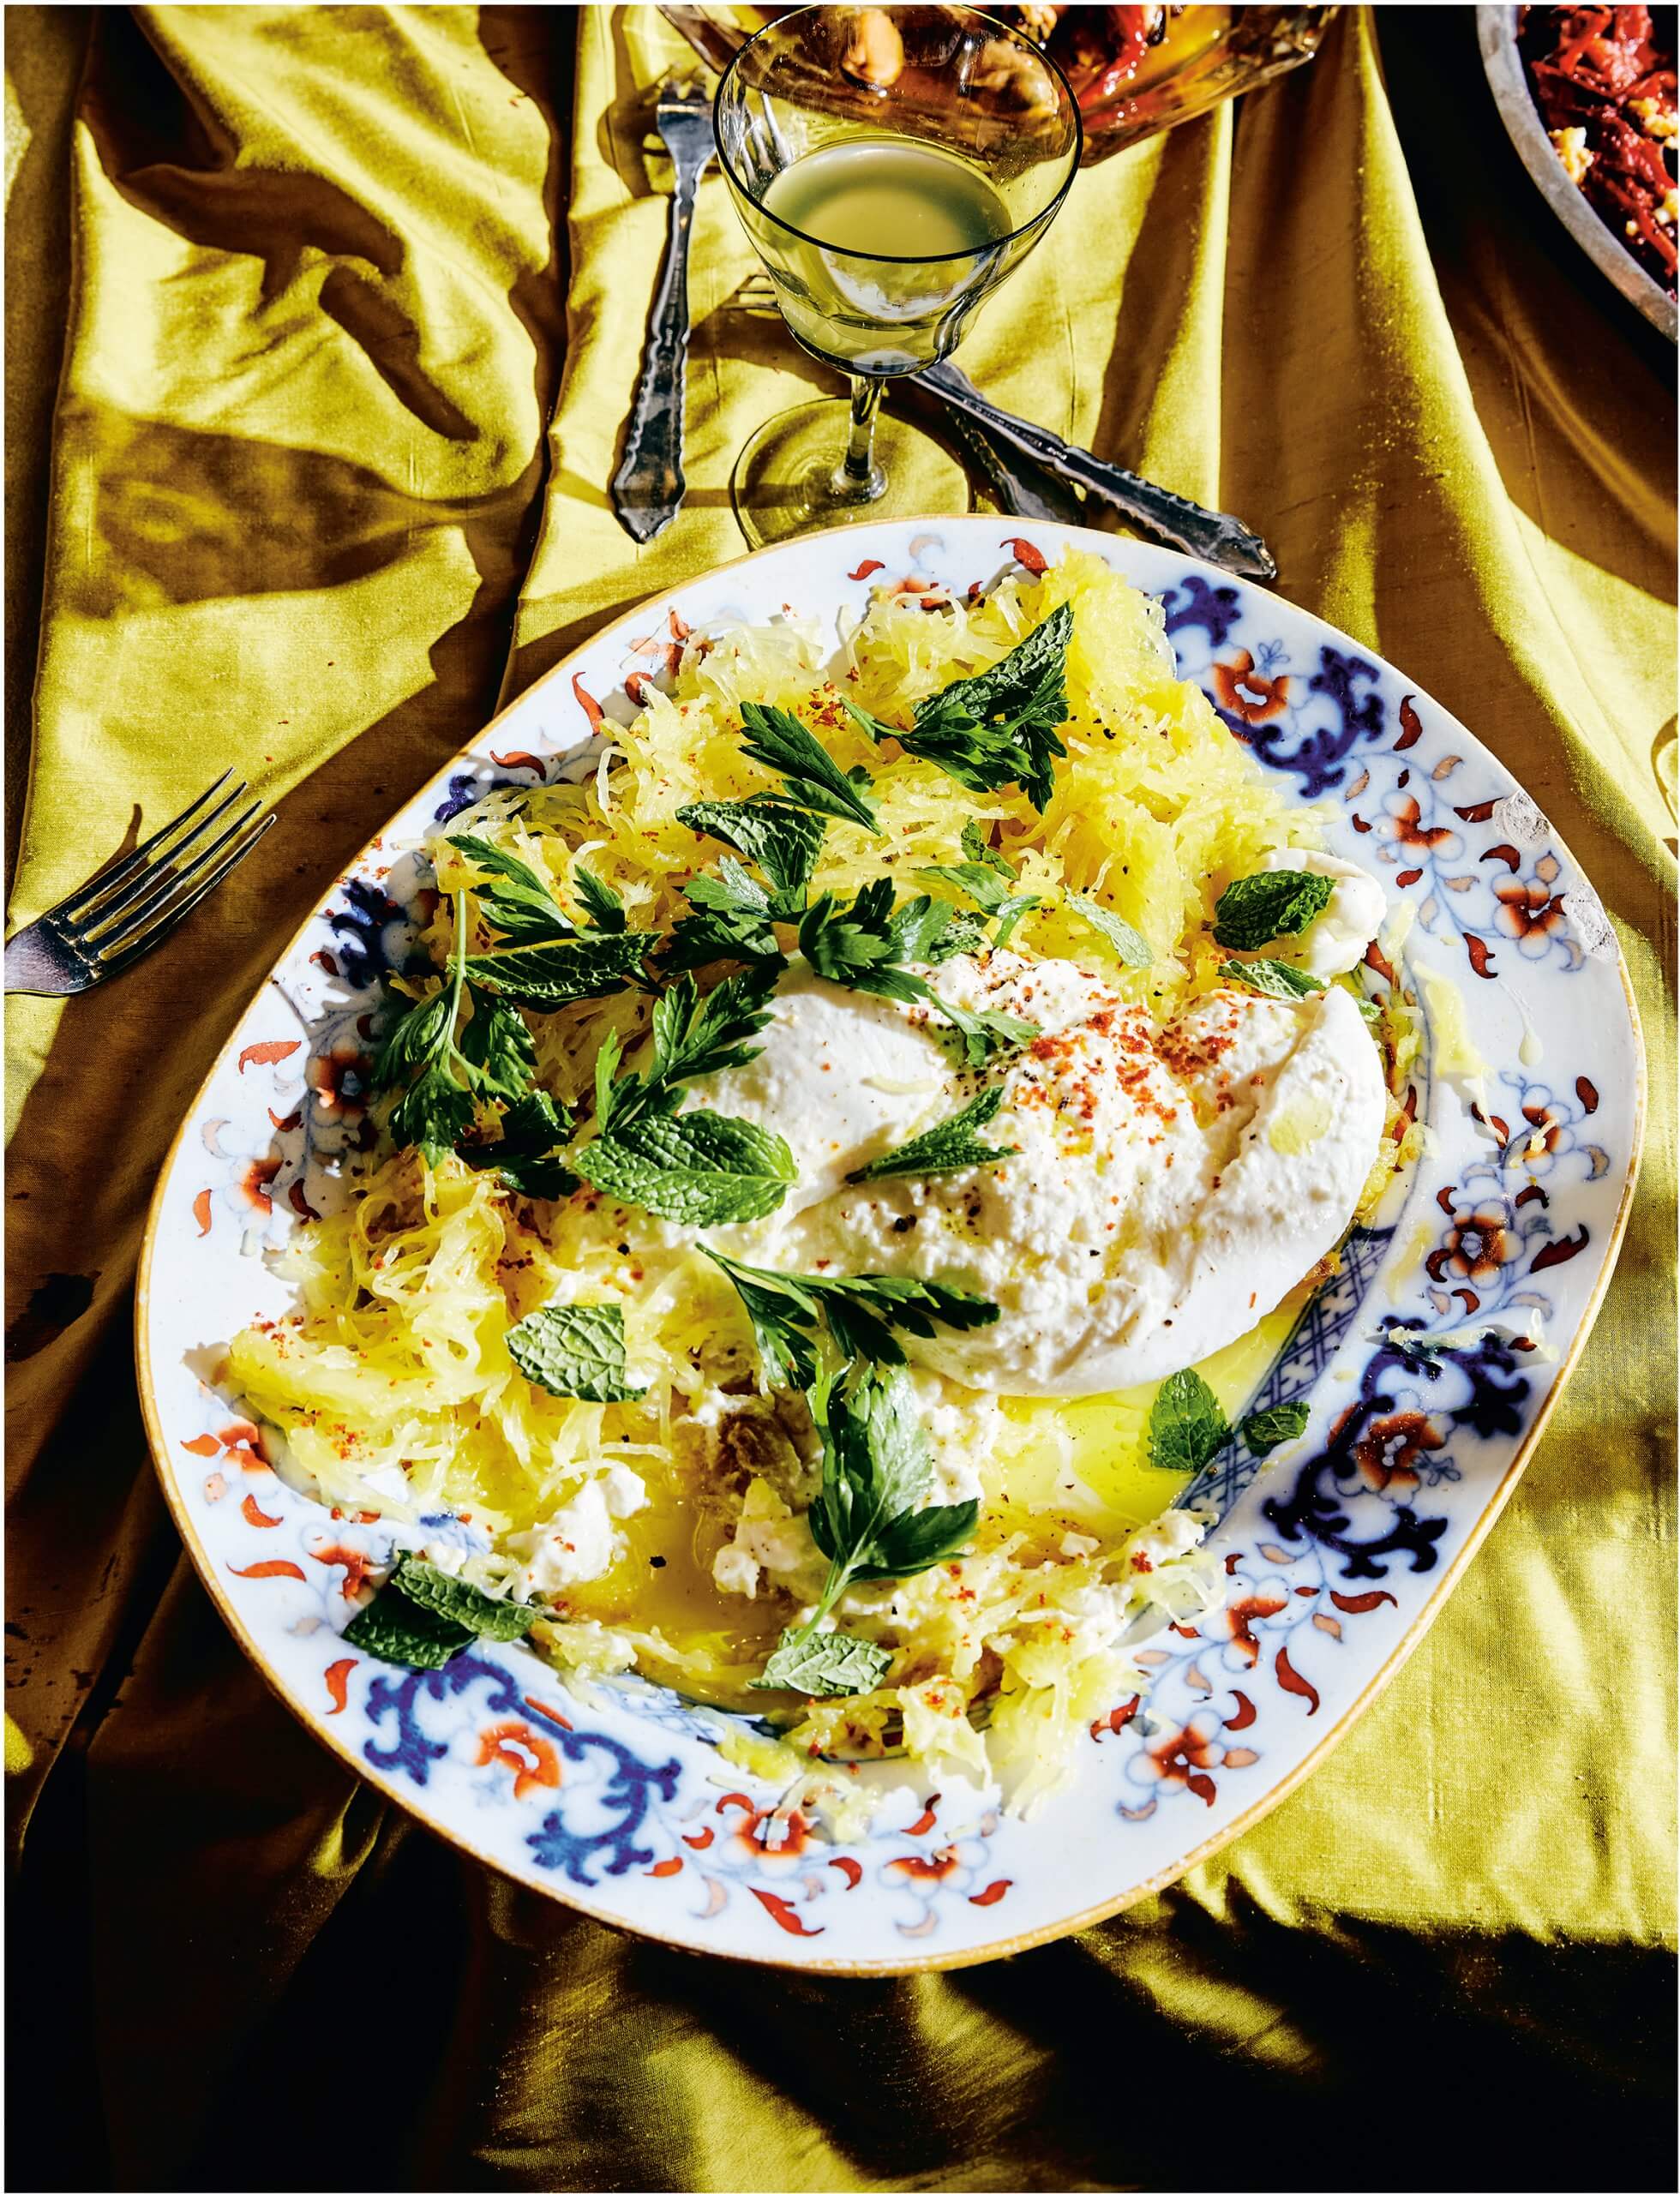 A plate with spaghetti squash and burrata on a silky yellow tablecloth